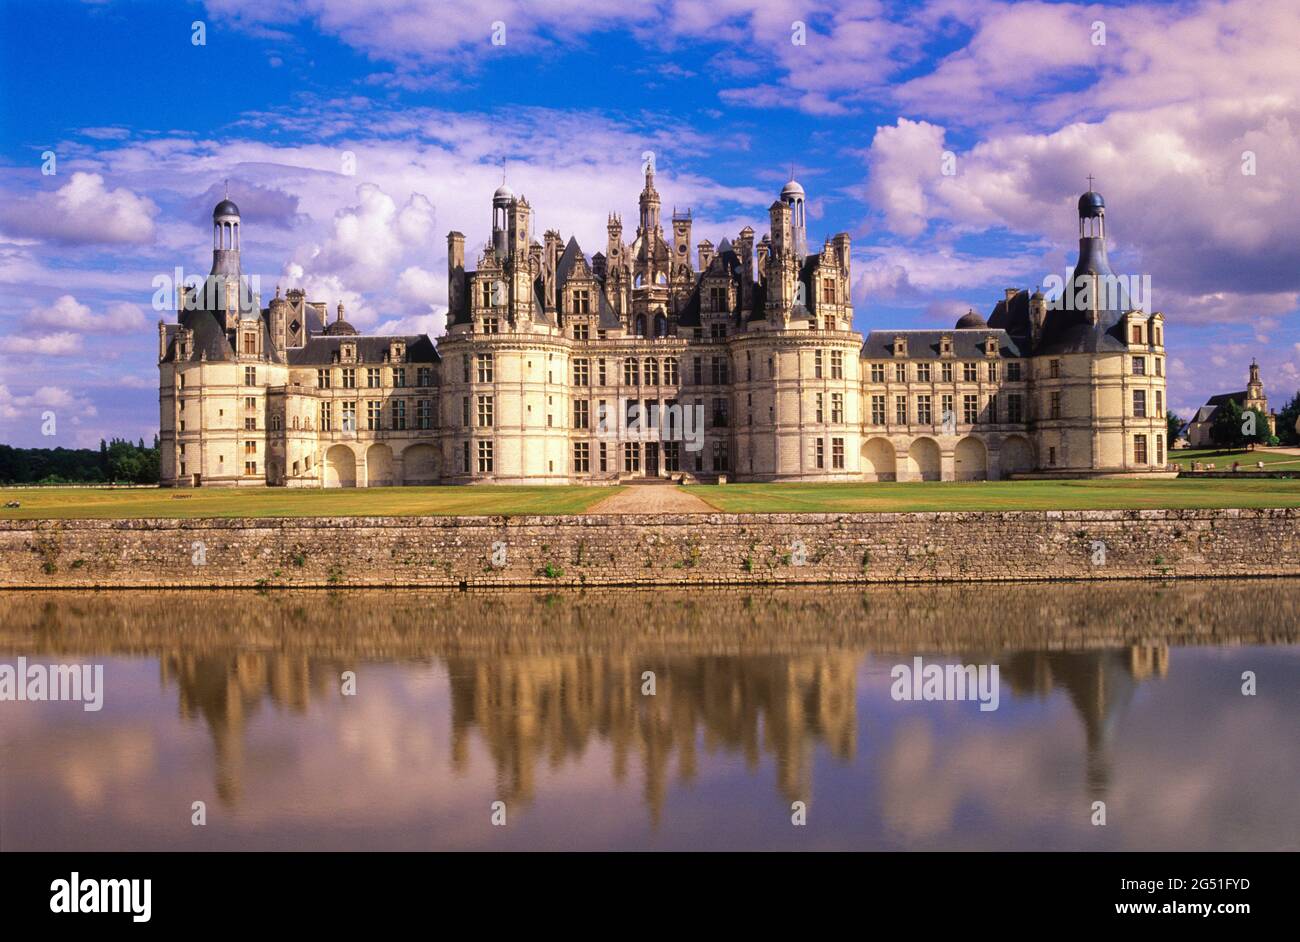 View of Chateau Chambord behind moat,  Chambord, Loir-et-Cher, France Stock Photo